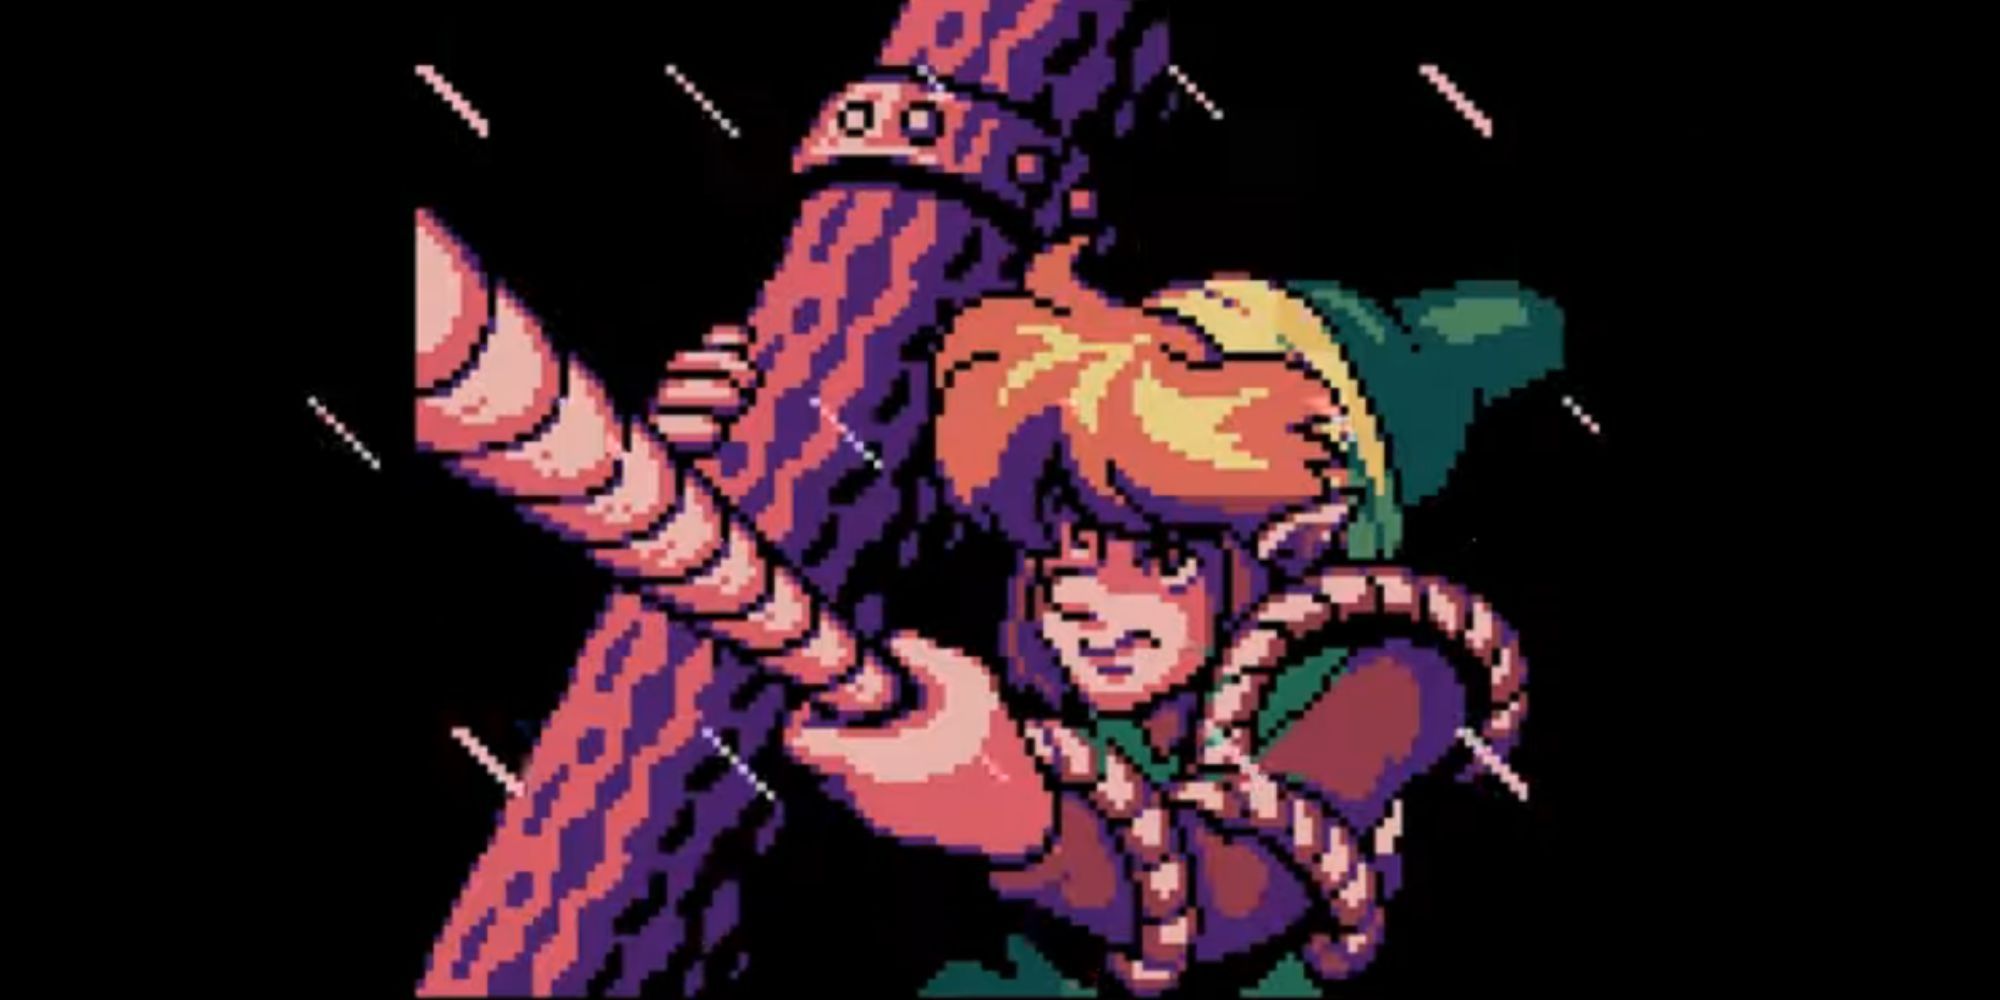 Link holds on to a raft during a storm in The Legend of Zelda: Link's Awakening